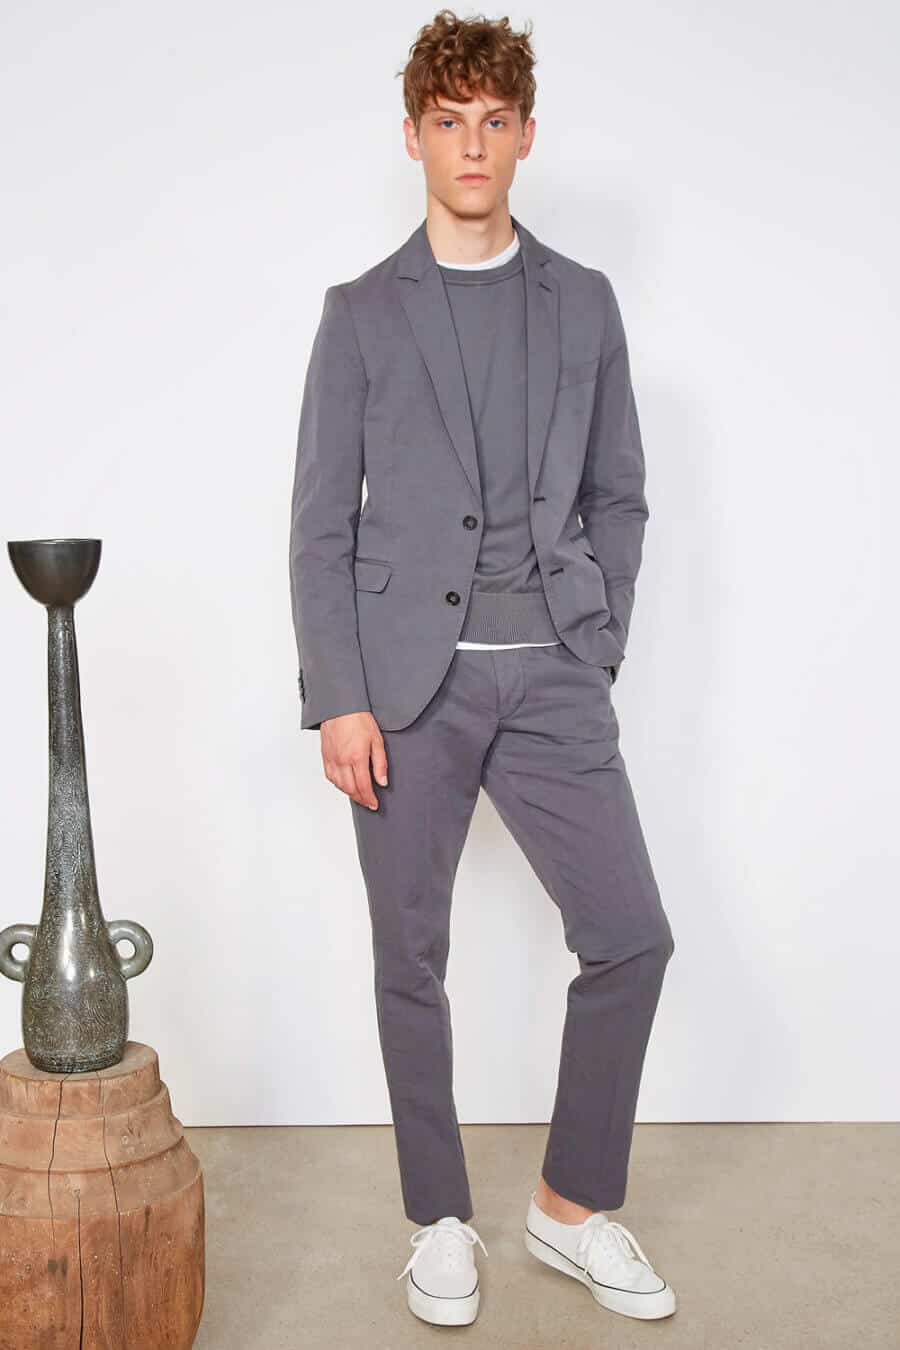 Men's grey suit and grey sweater with white sneakers outfit